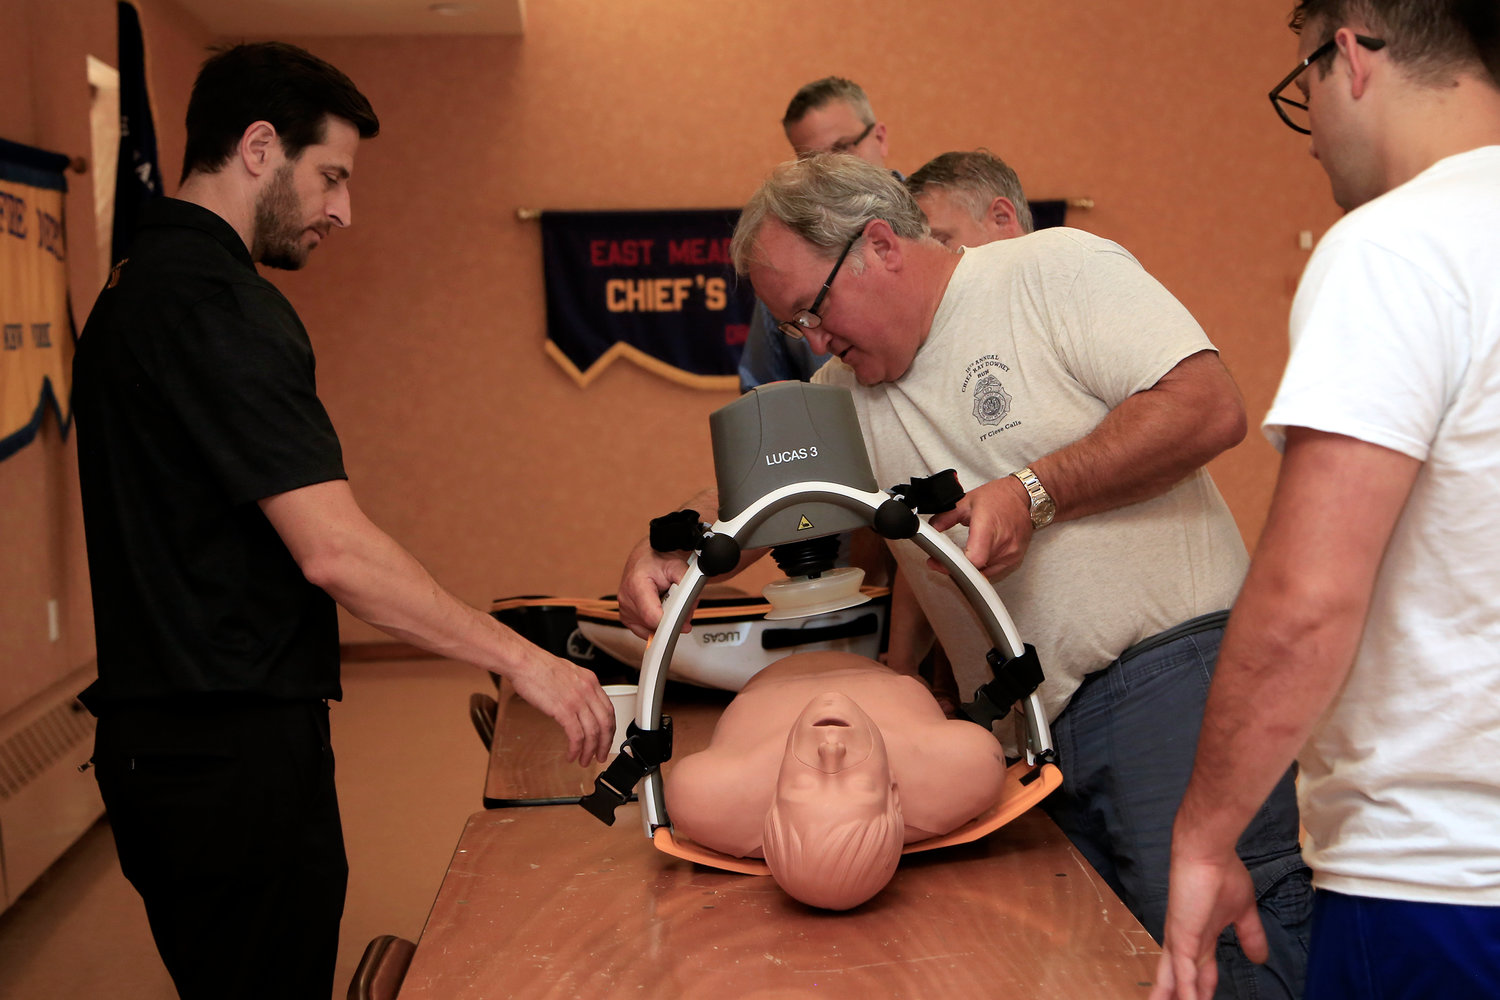 Ryan Pinnix, left, a representative of the Lund University Cardiopulmonary Assist System, helped Paul Kosiba, chief of the East Meadow Fire Department, use the Lucas, a mechanical device that can replace CPR.